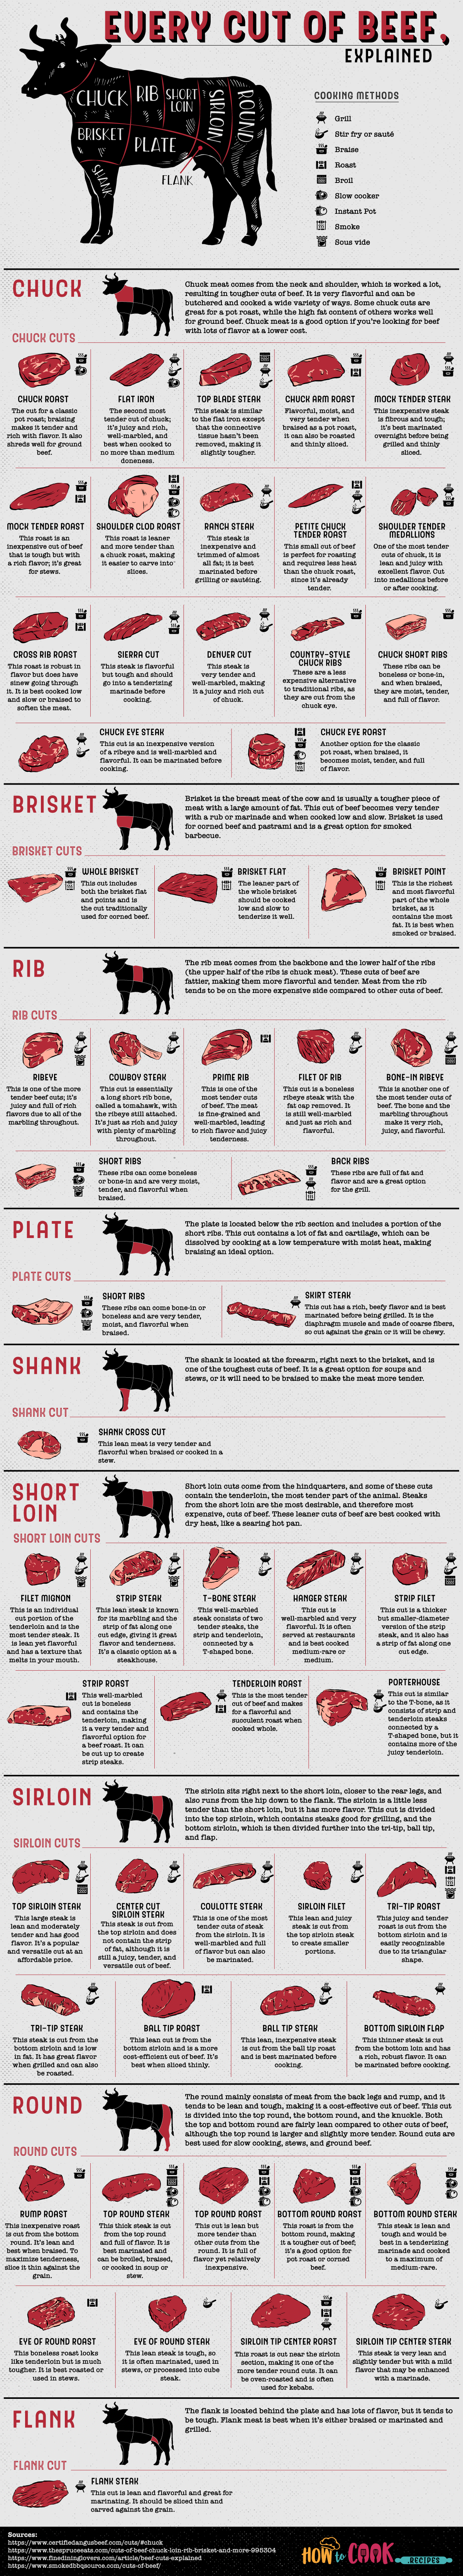 Every Cut of Beef, Explained